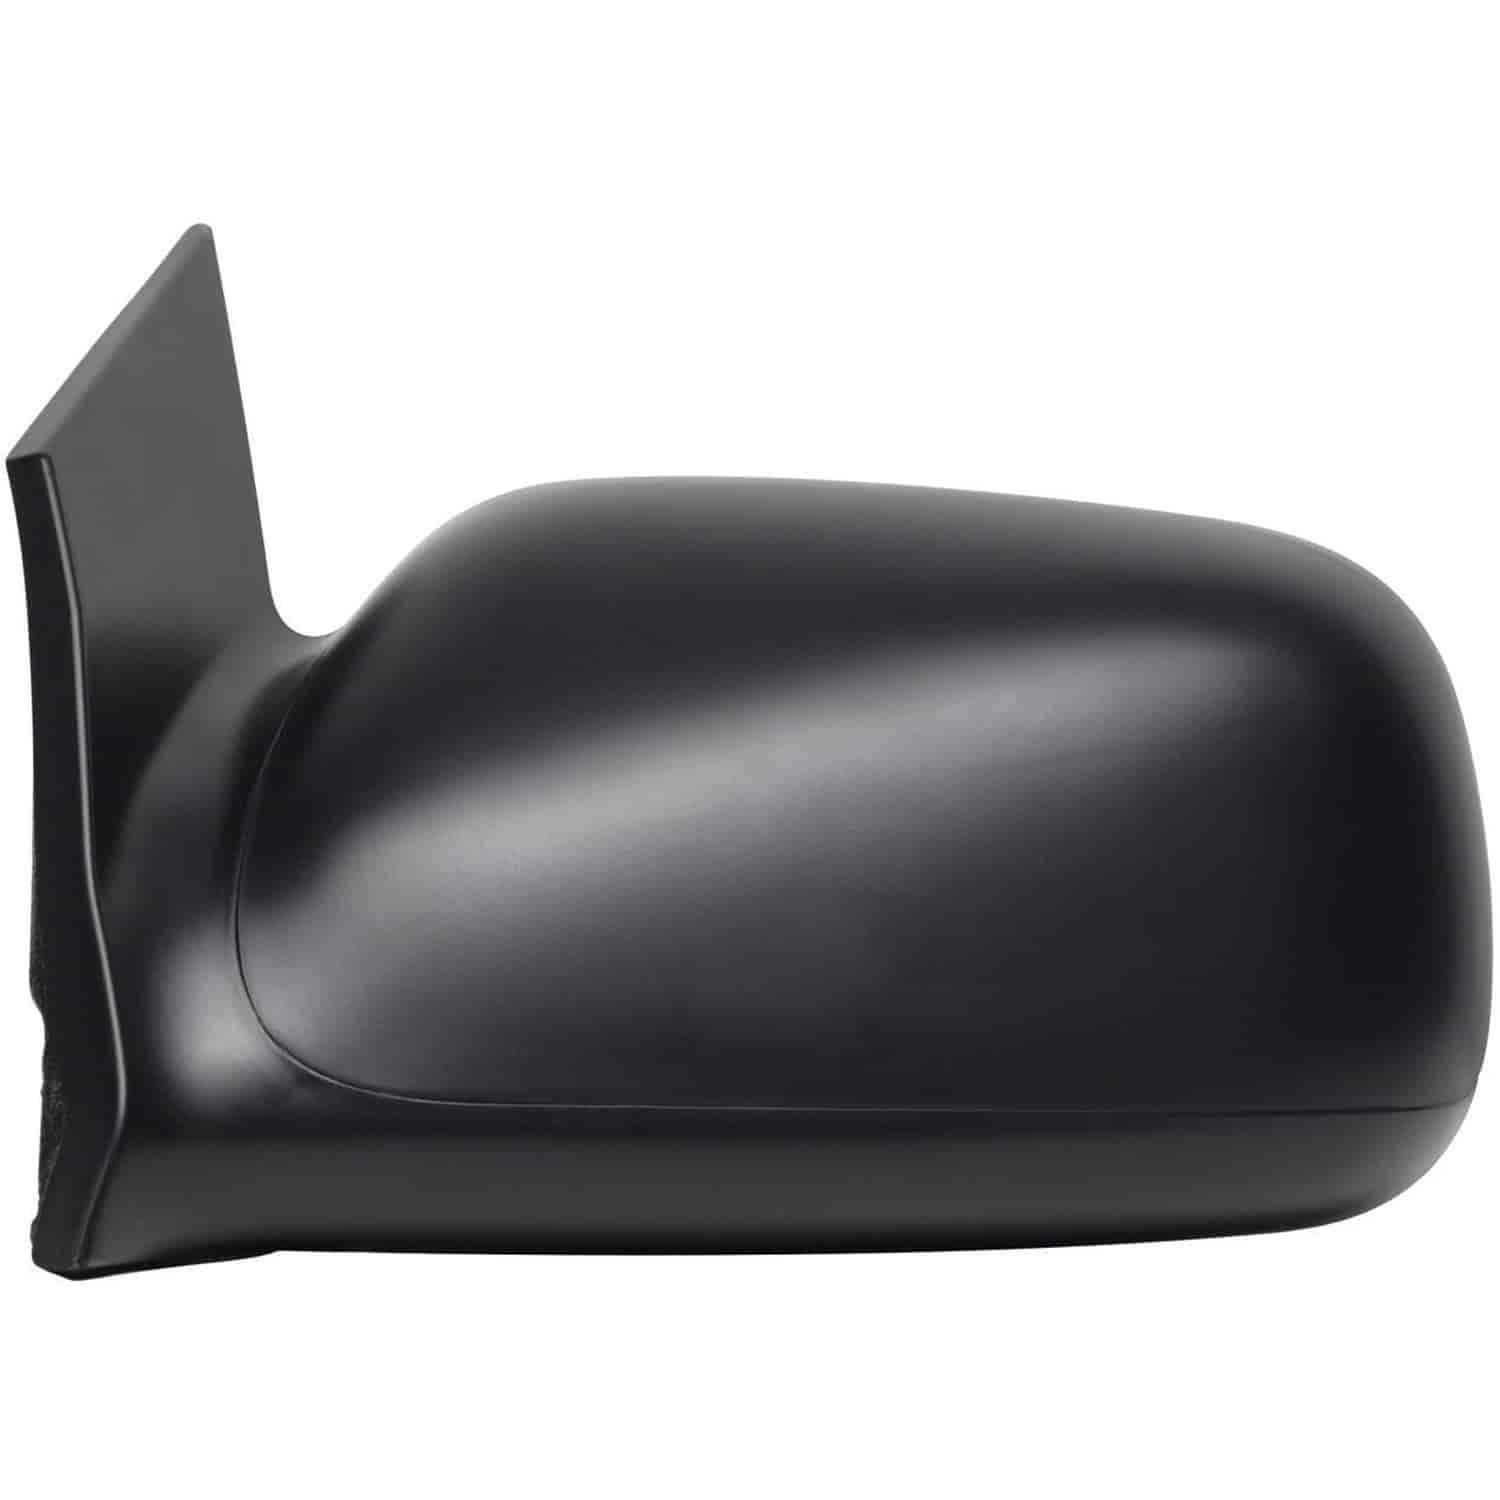 OEM Style Replacement mirror for 06-11 Honda Civic Coupe Ex/Si-Navi LX Model driver side mirror test